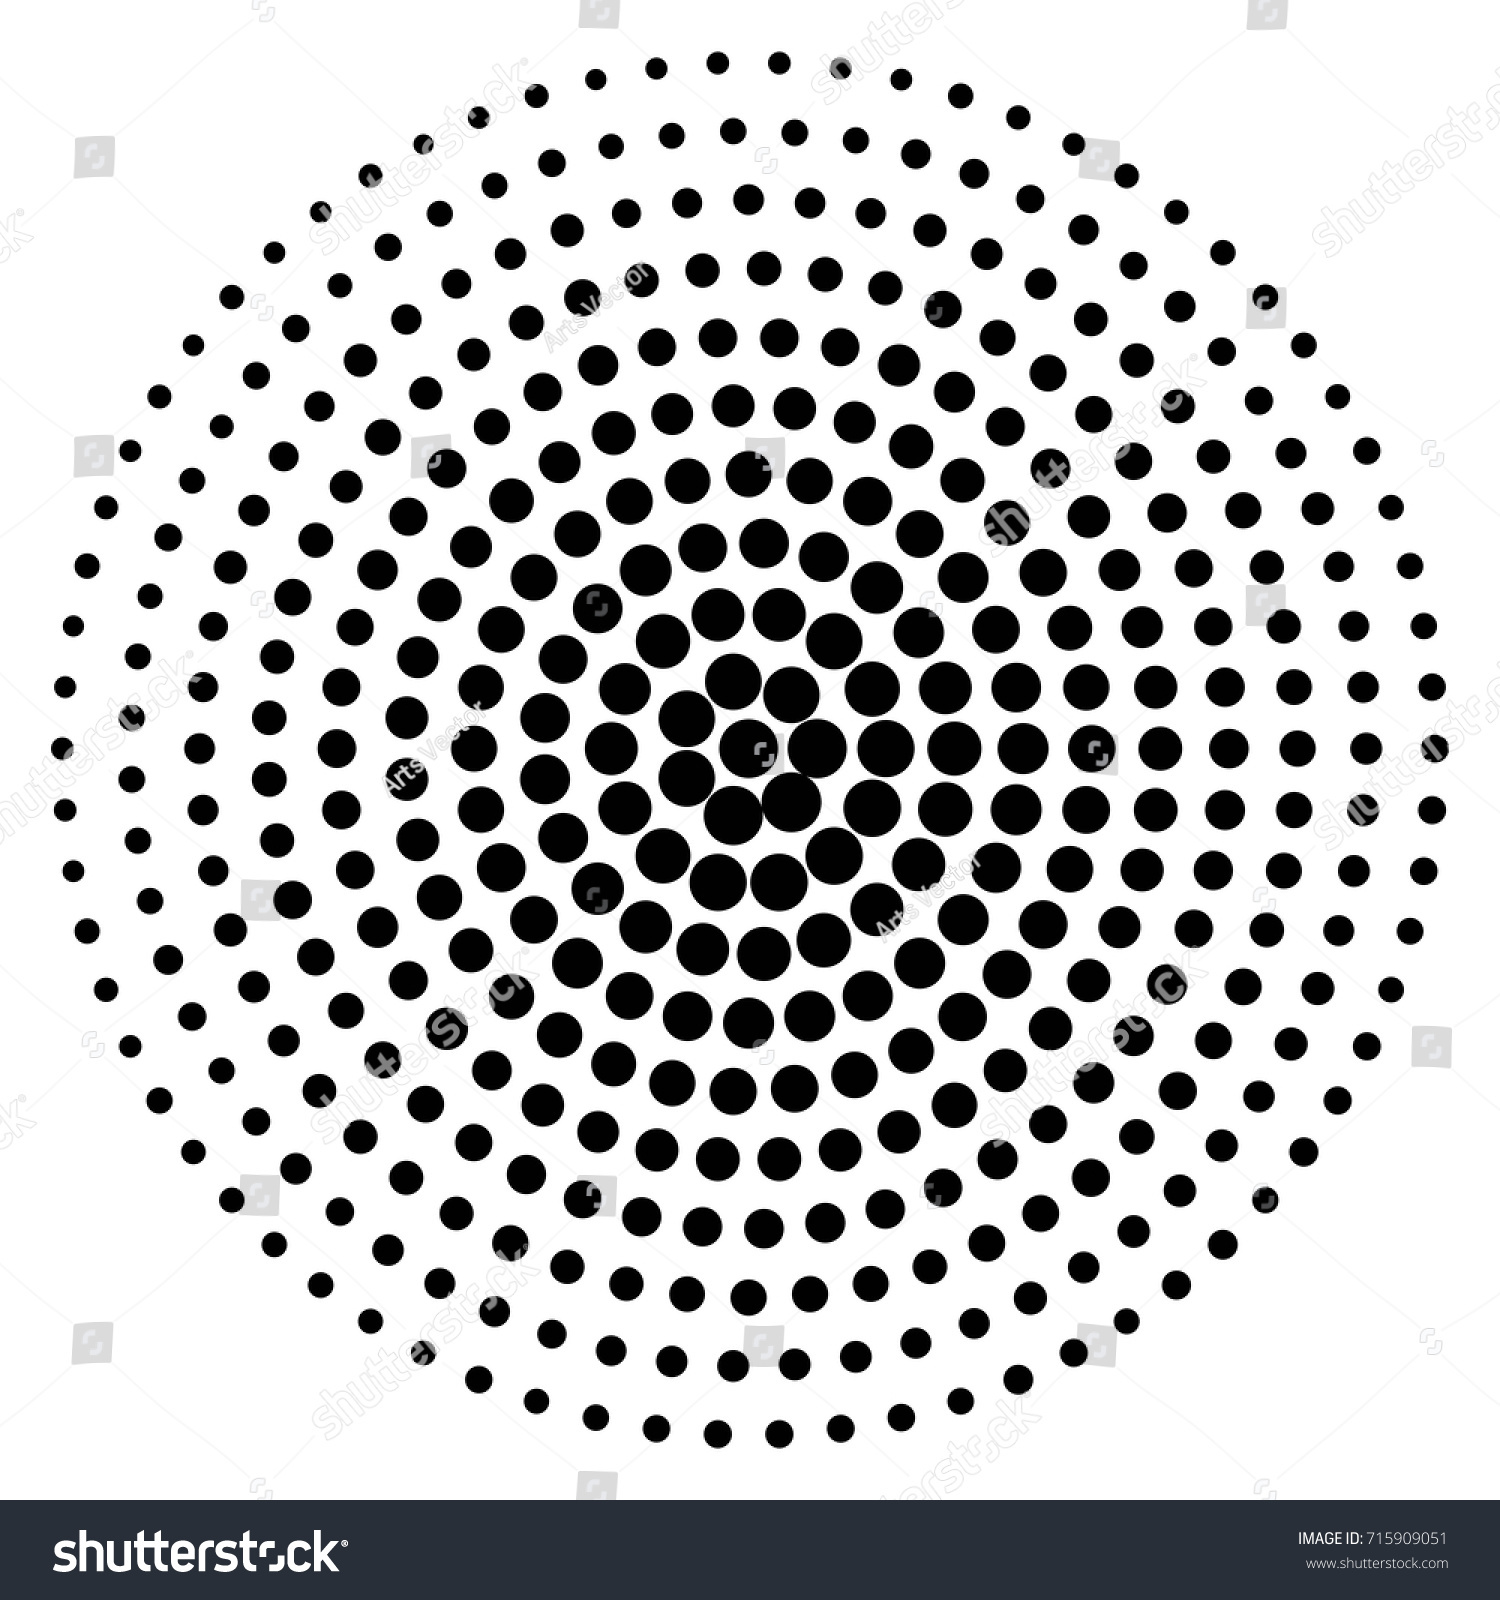 Circle Dot Patterns Dotted Background Stock Vector HD (Royalty Free ...